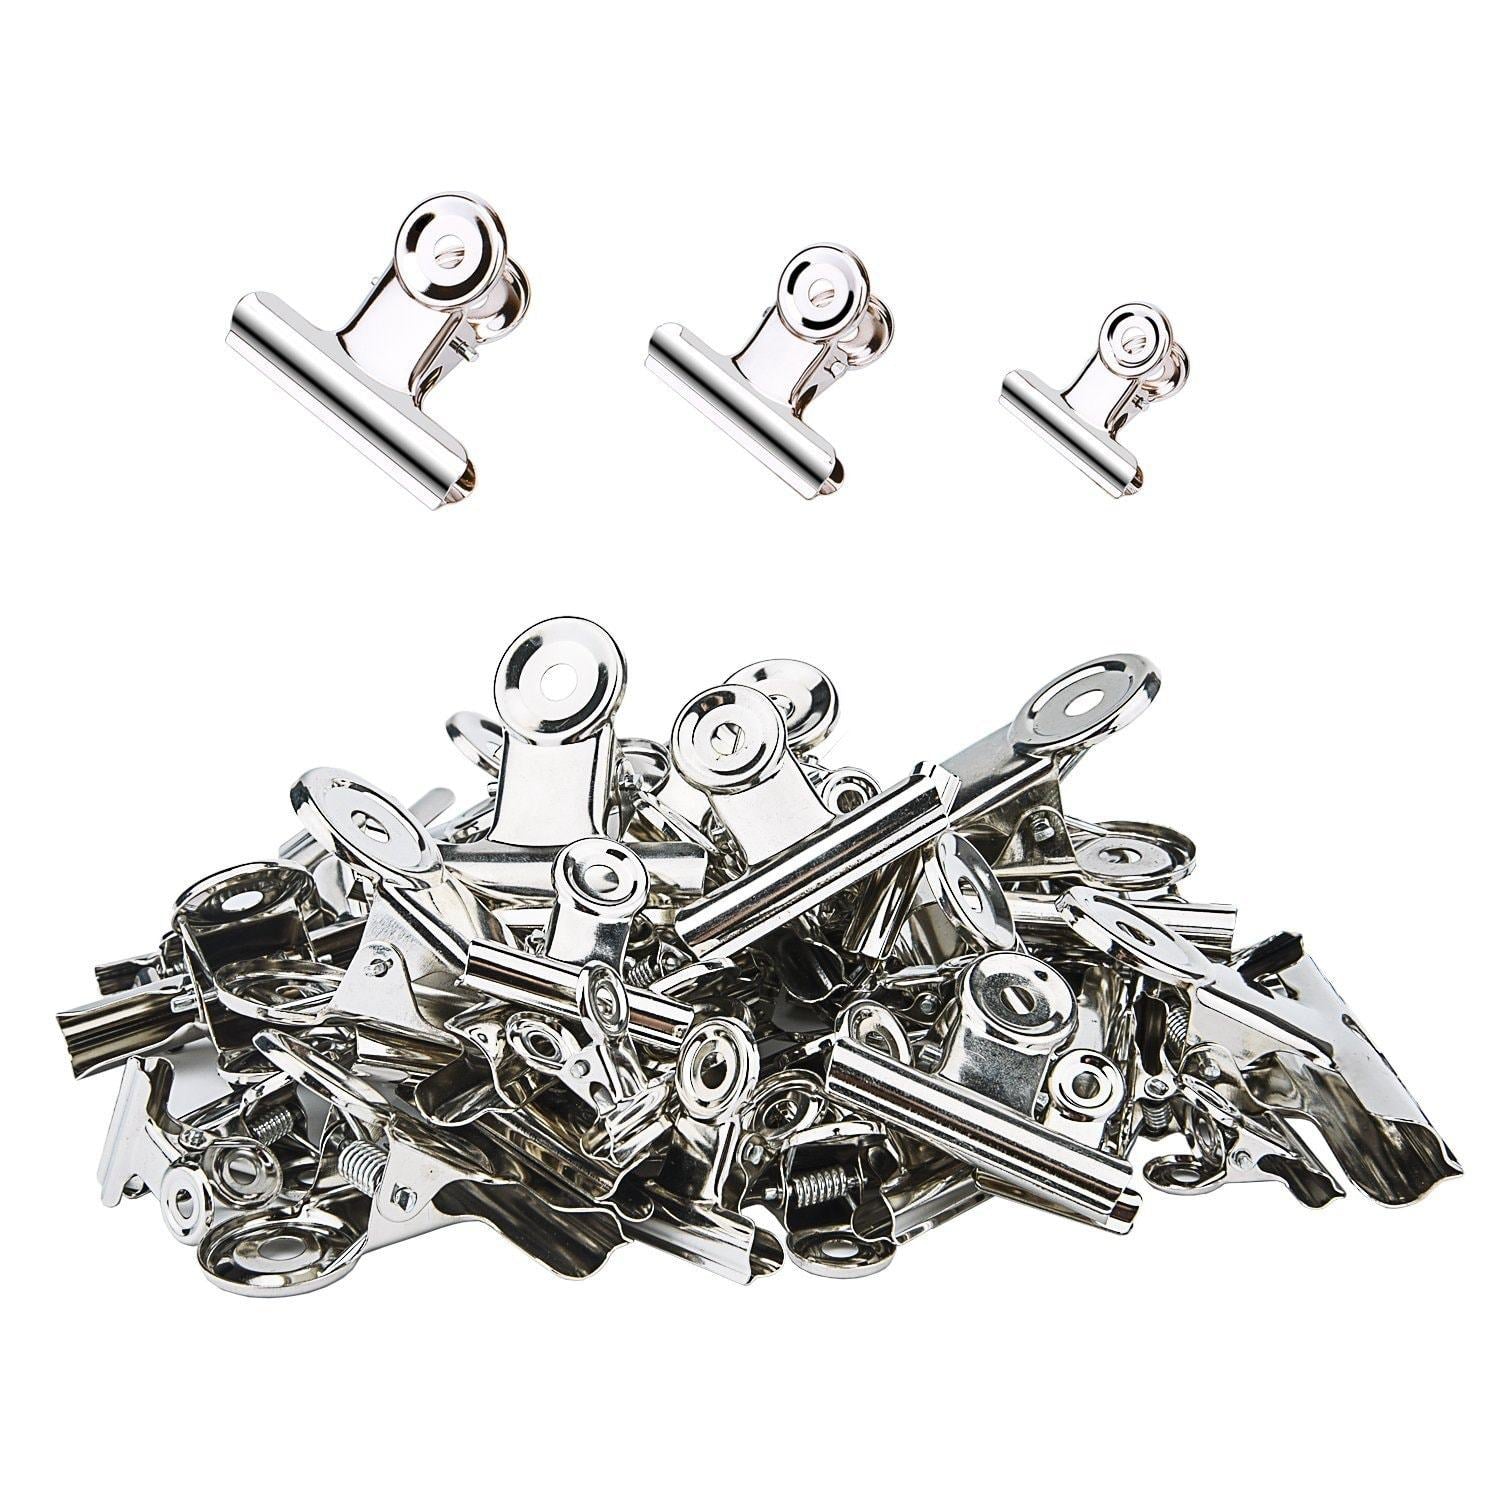 Best seller  sunmns 50 pieces stainless steel clips heavy duty metal clip for photos bags kitchen home office usage 3 sizes 1 18 1 5 2 inch